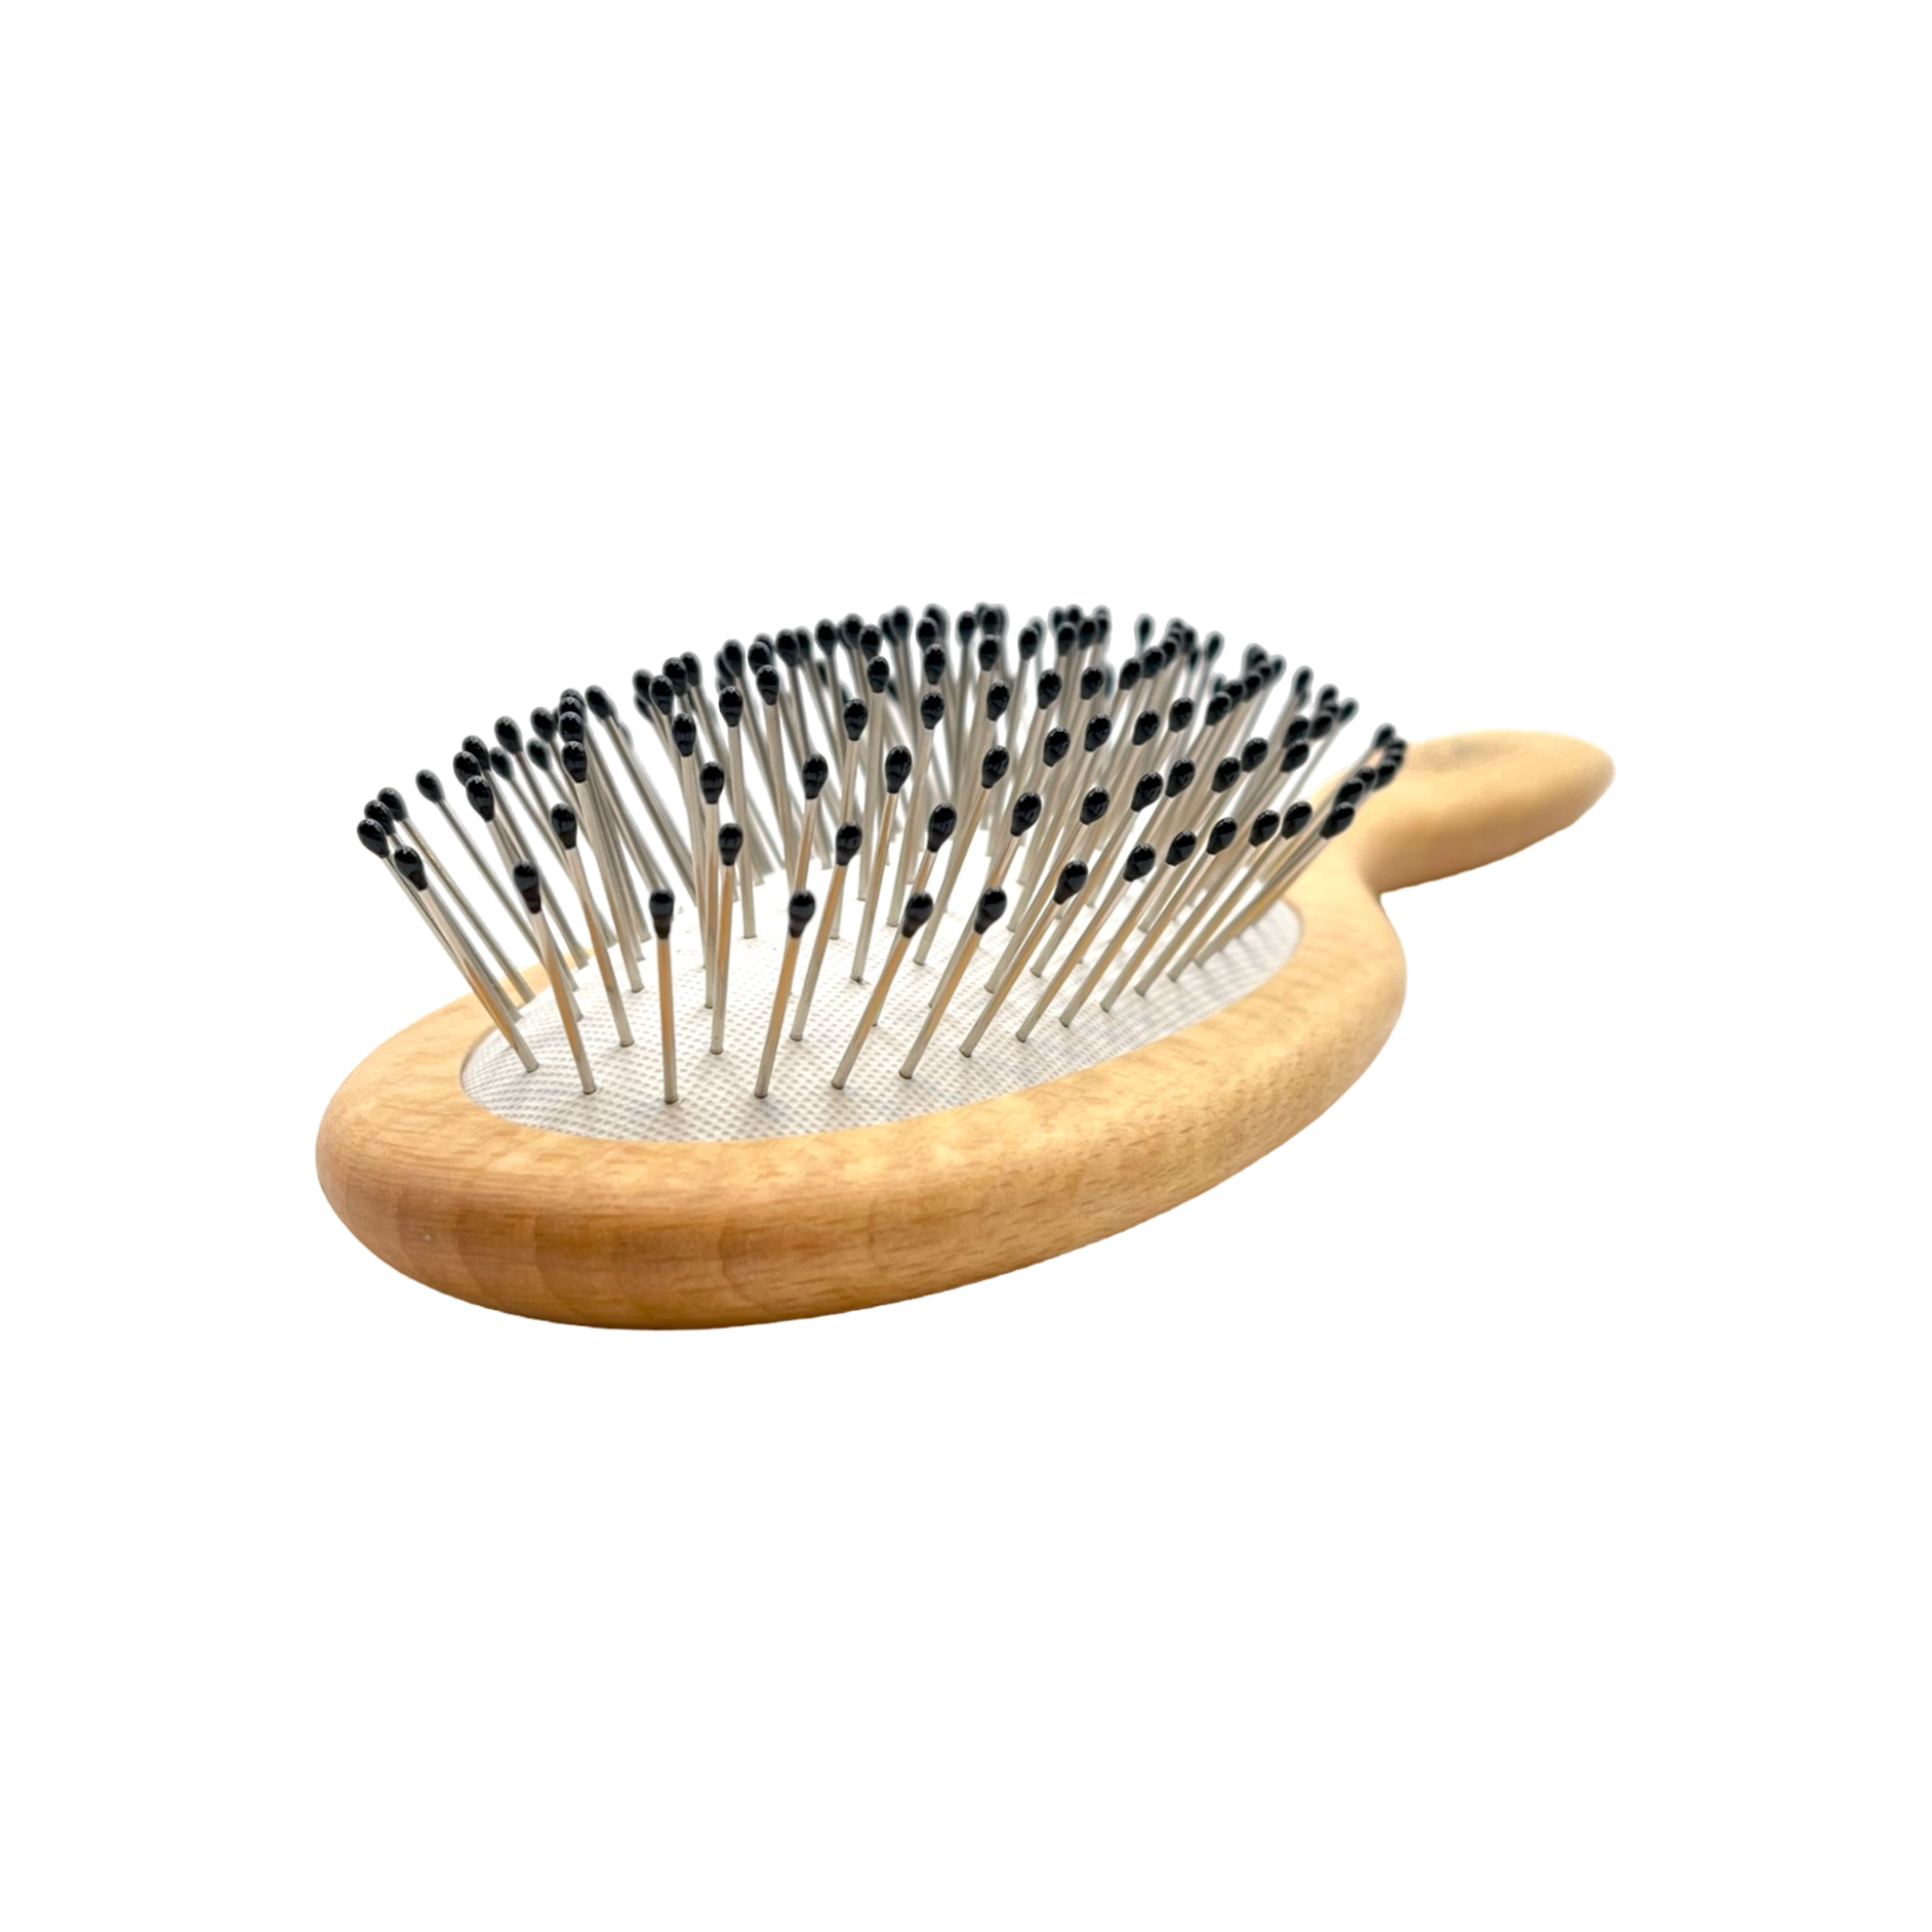 Dural Rubber Cushion Beech Wood Hair Brush, Steel Pins with Ball Tips